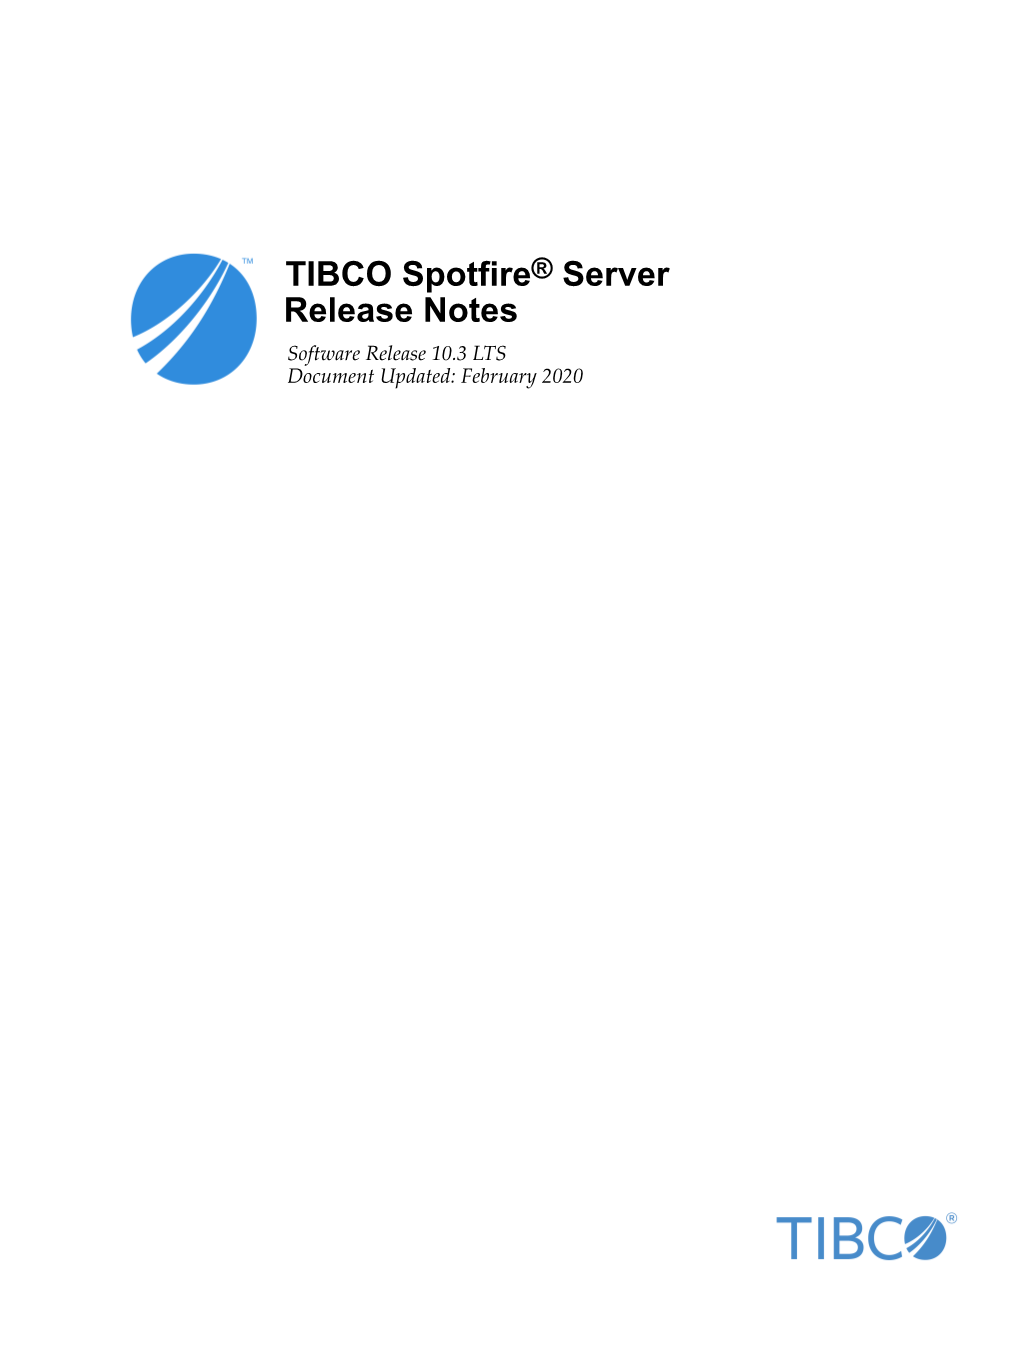 TIBCO Spotfire® Server Release Notes Software Release 10.3 LTS Document Updated: February 2020 2